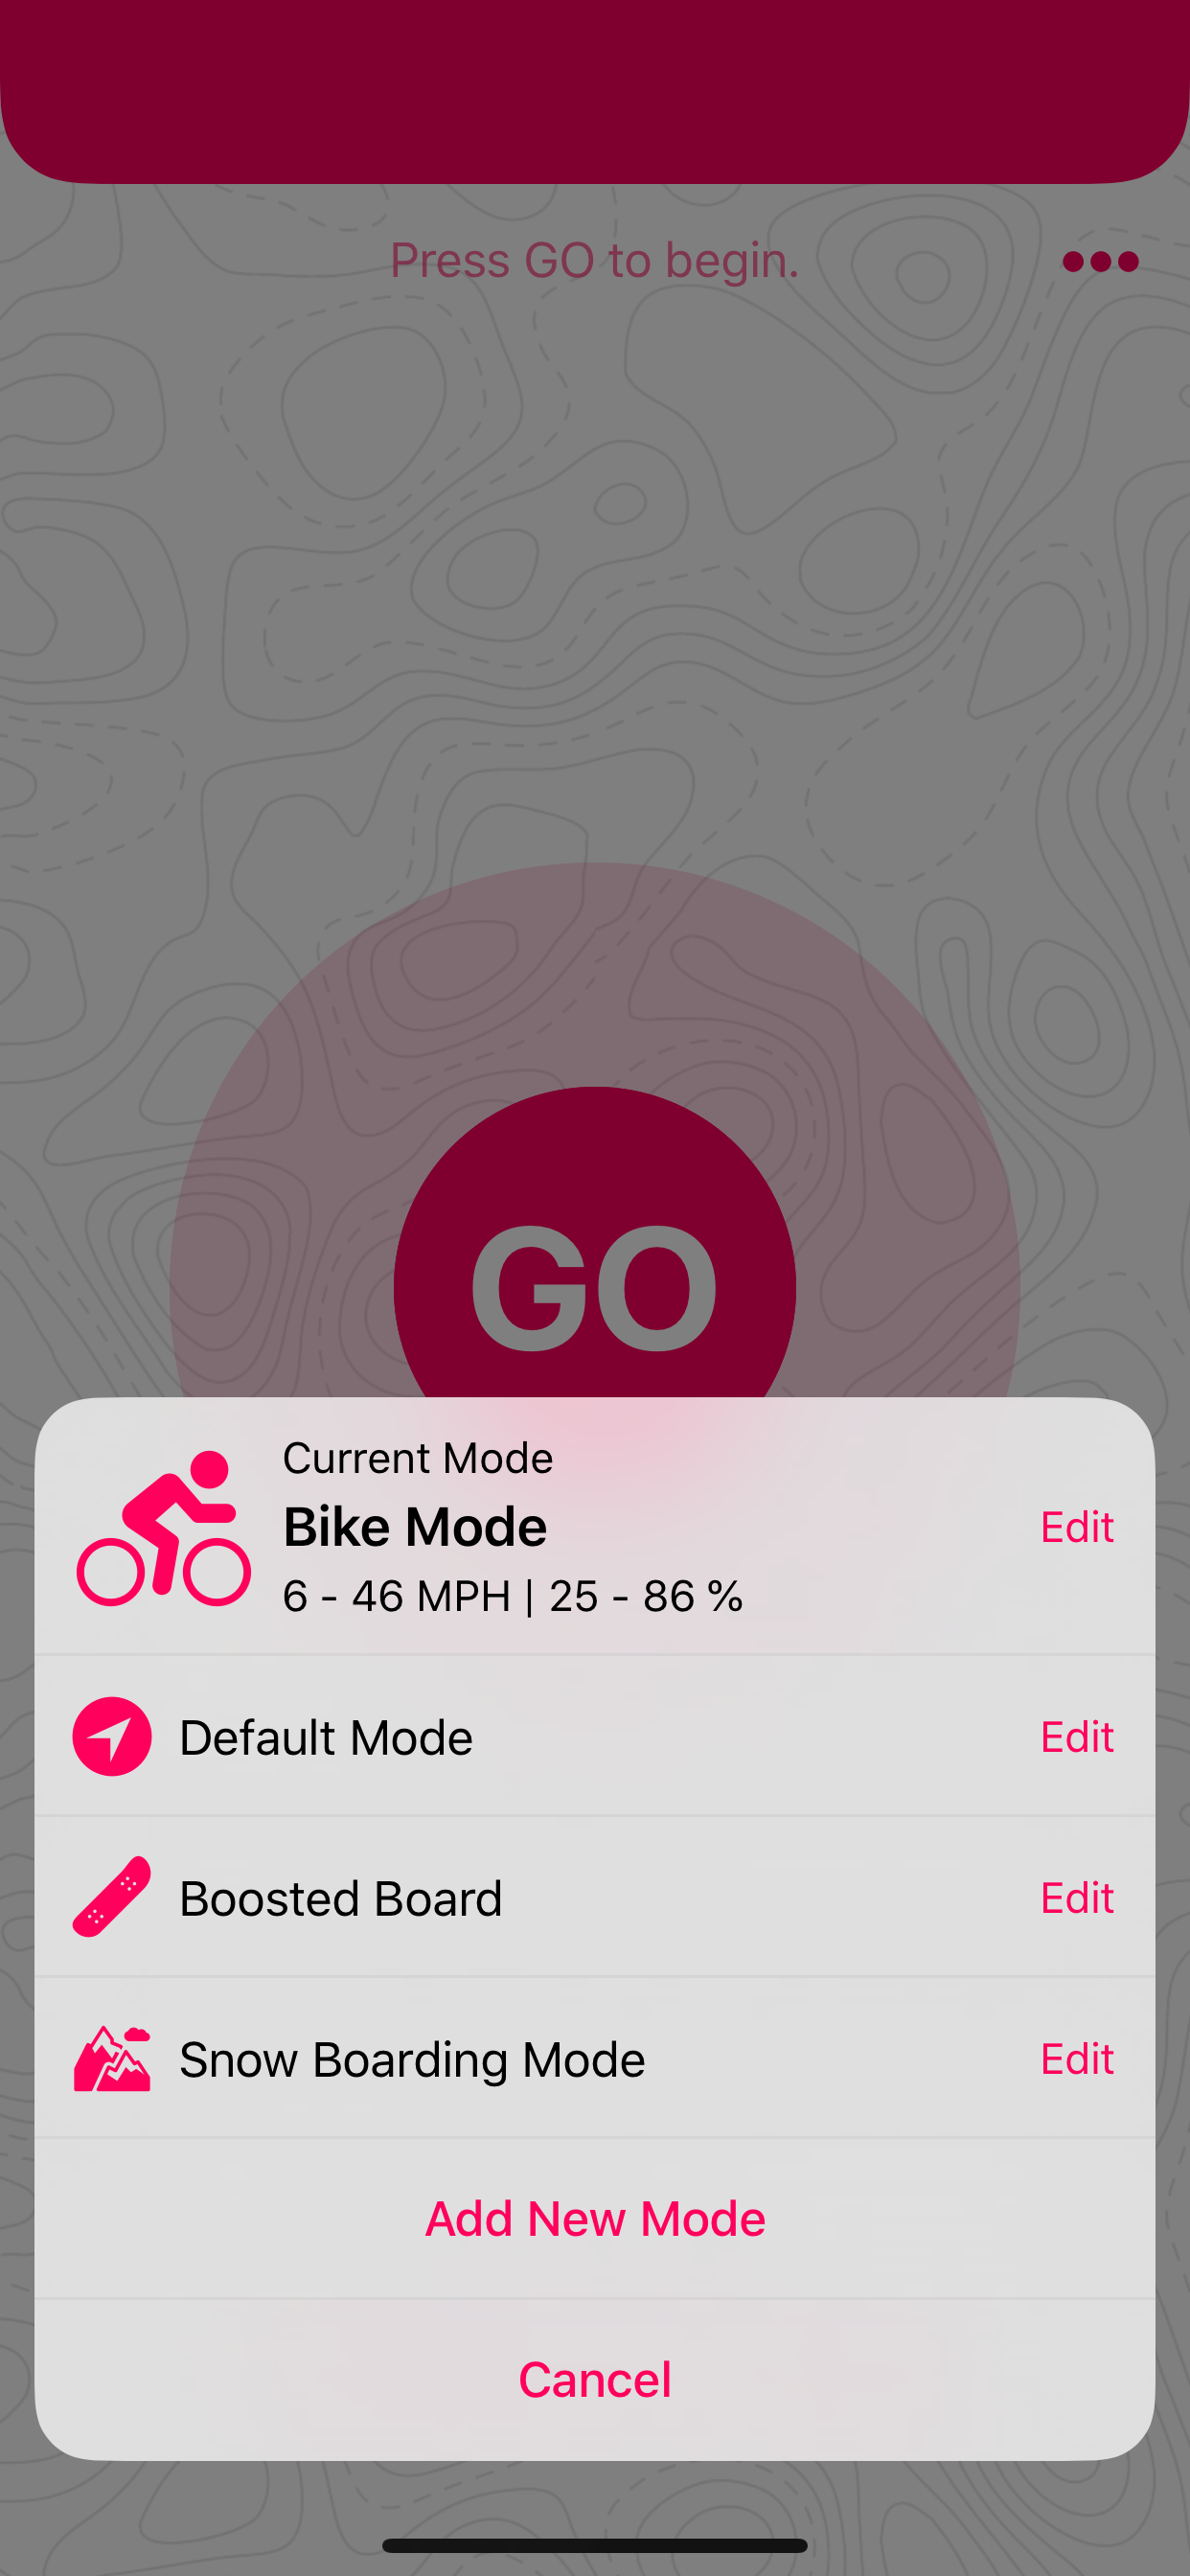 The Tempo iPhone app is open and is showing the mode selection screen.